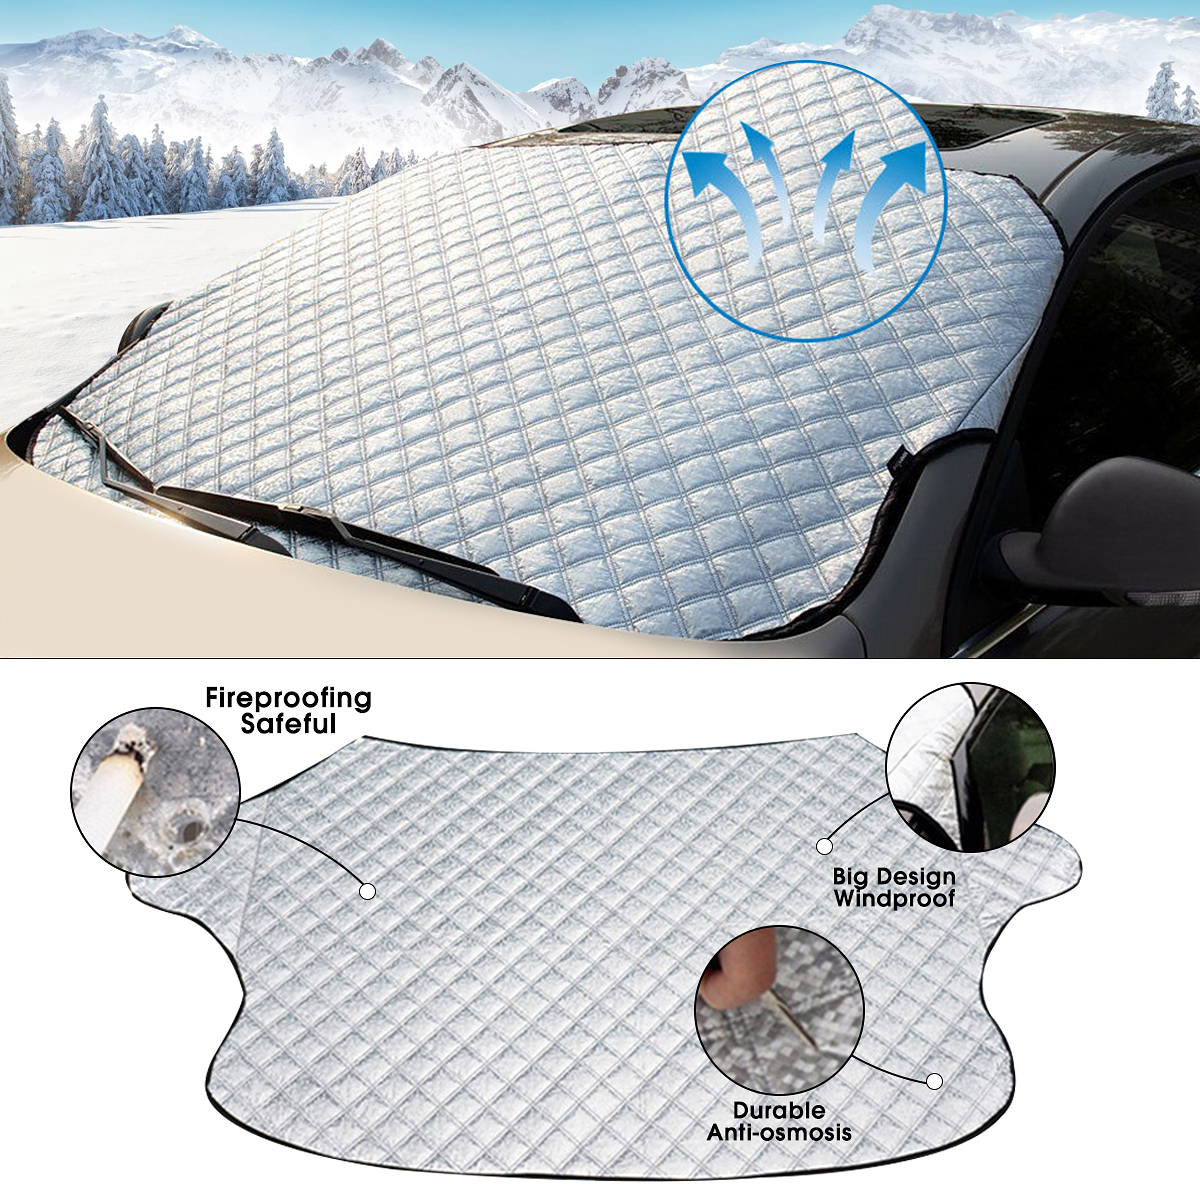 Car Cover All-seasons Windshield Waterproof Cover & Sun Shade UV Protector Cover with Cotton Thicker, Universal Car Cover for Auto SUV Small Car, 57.87(width) x 40.16(height) - image 3 of 9